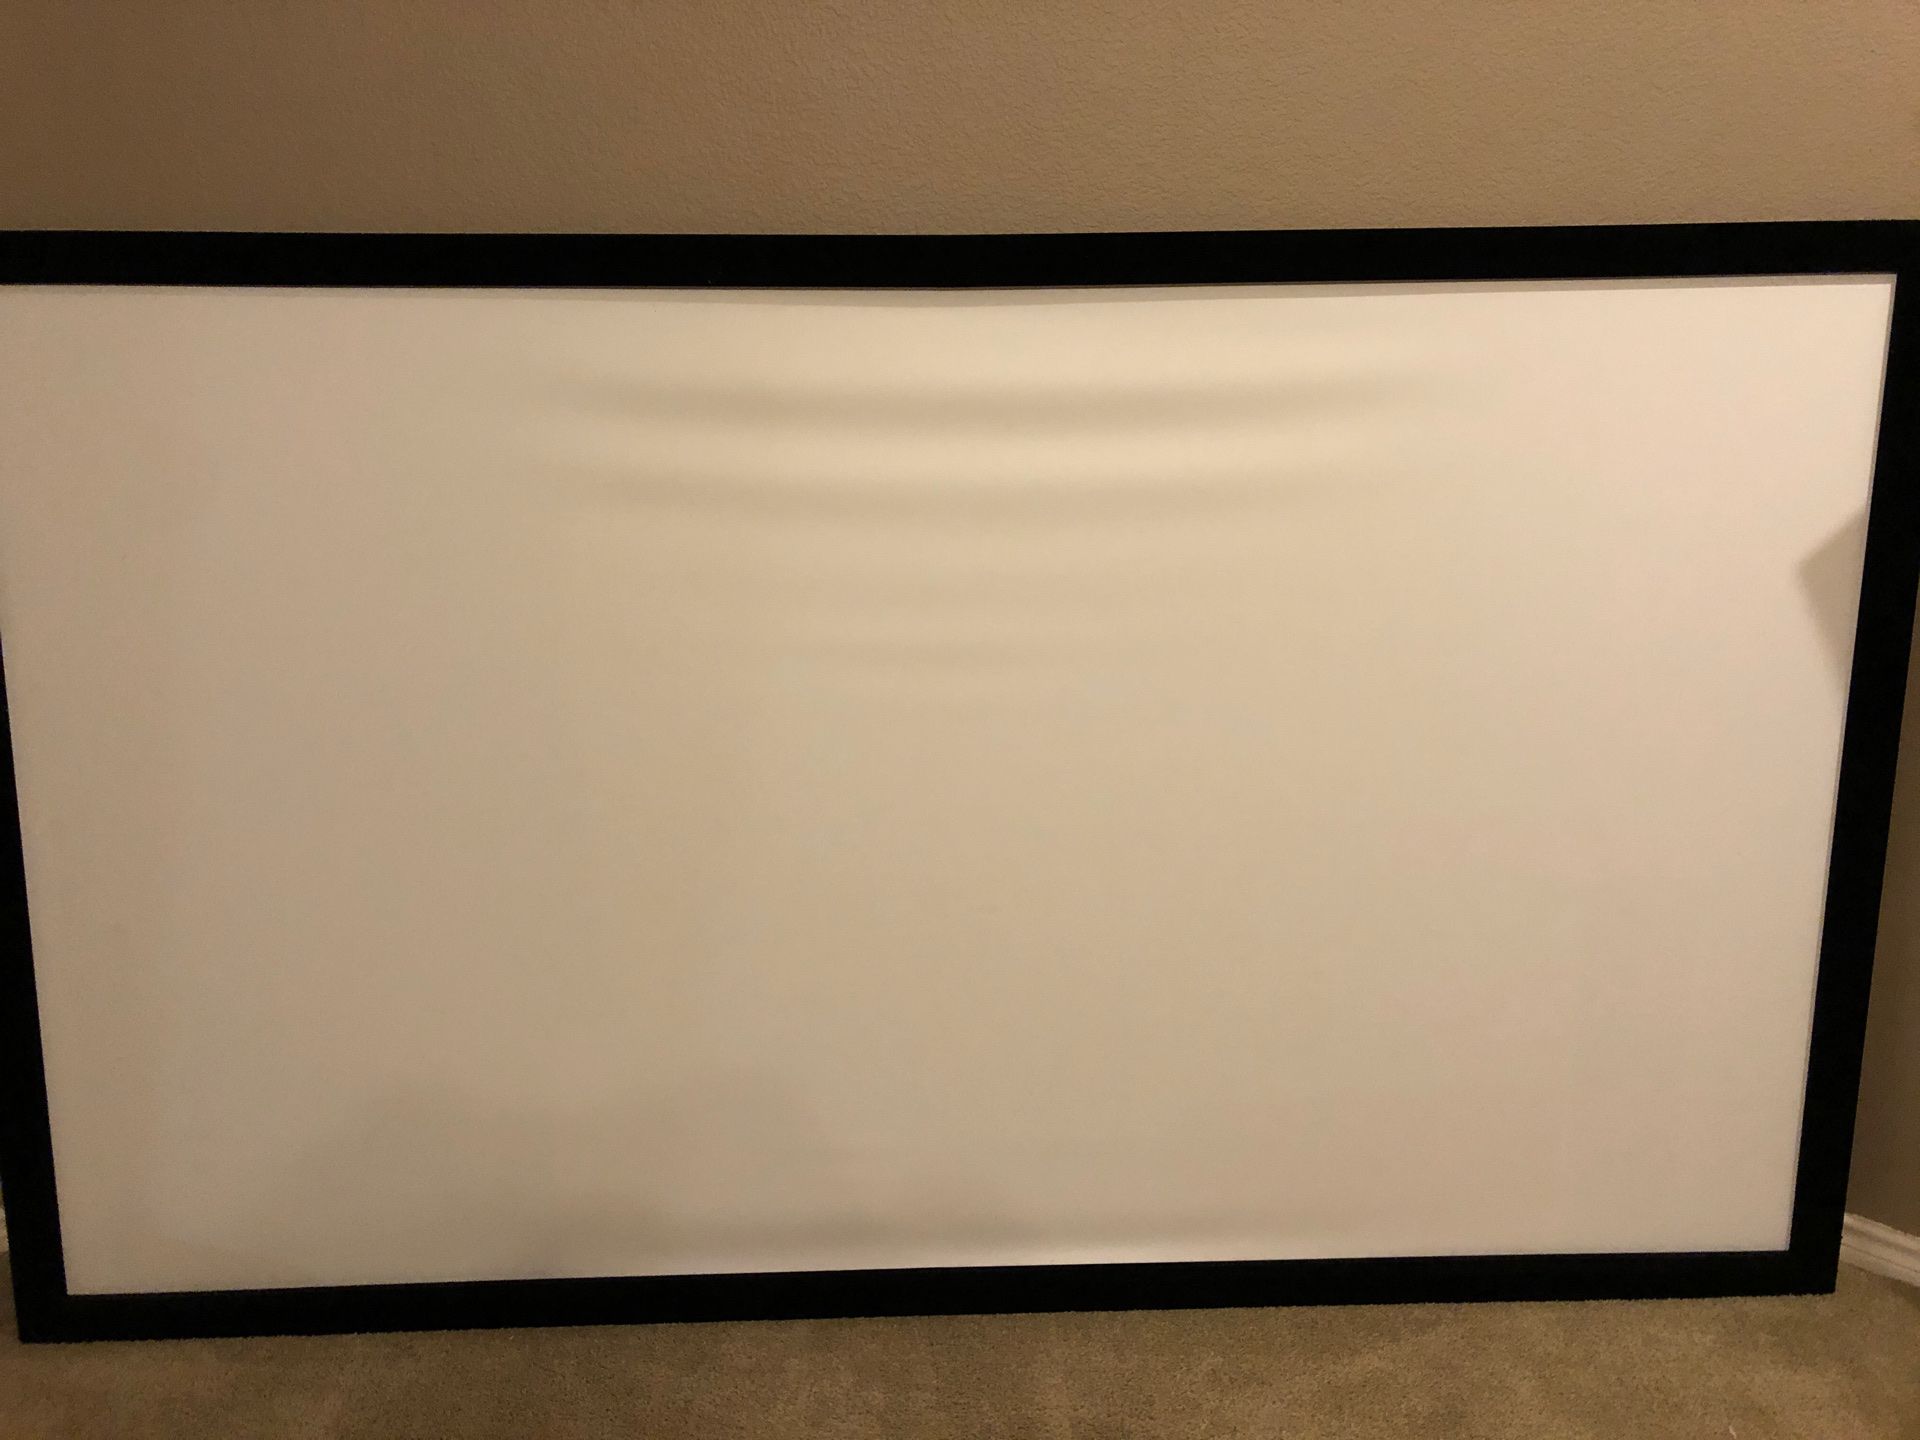 110 inch projection screen